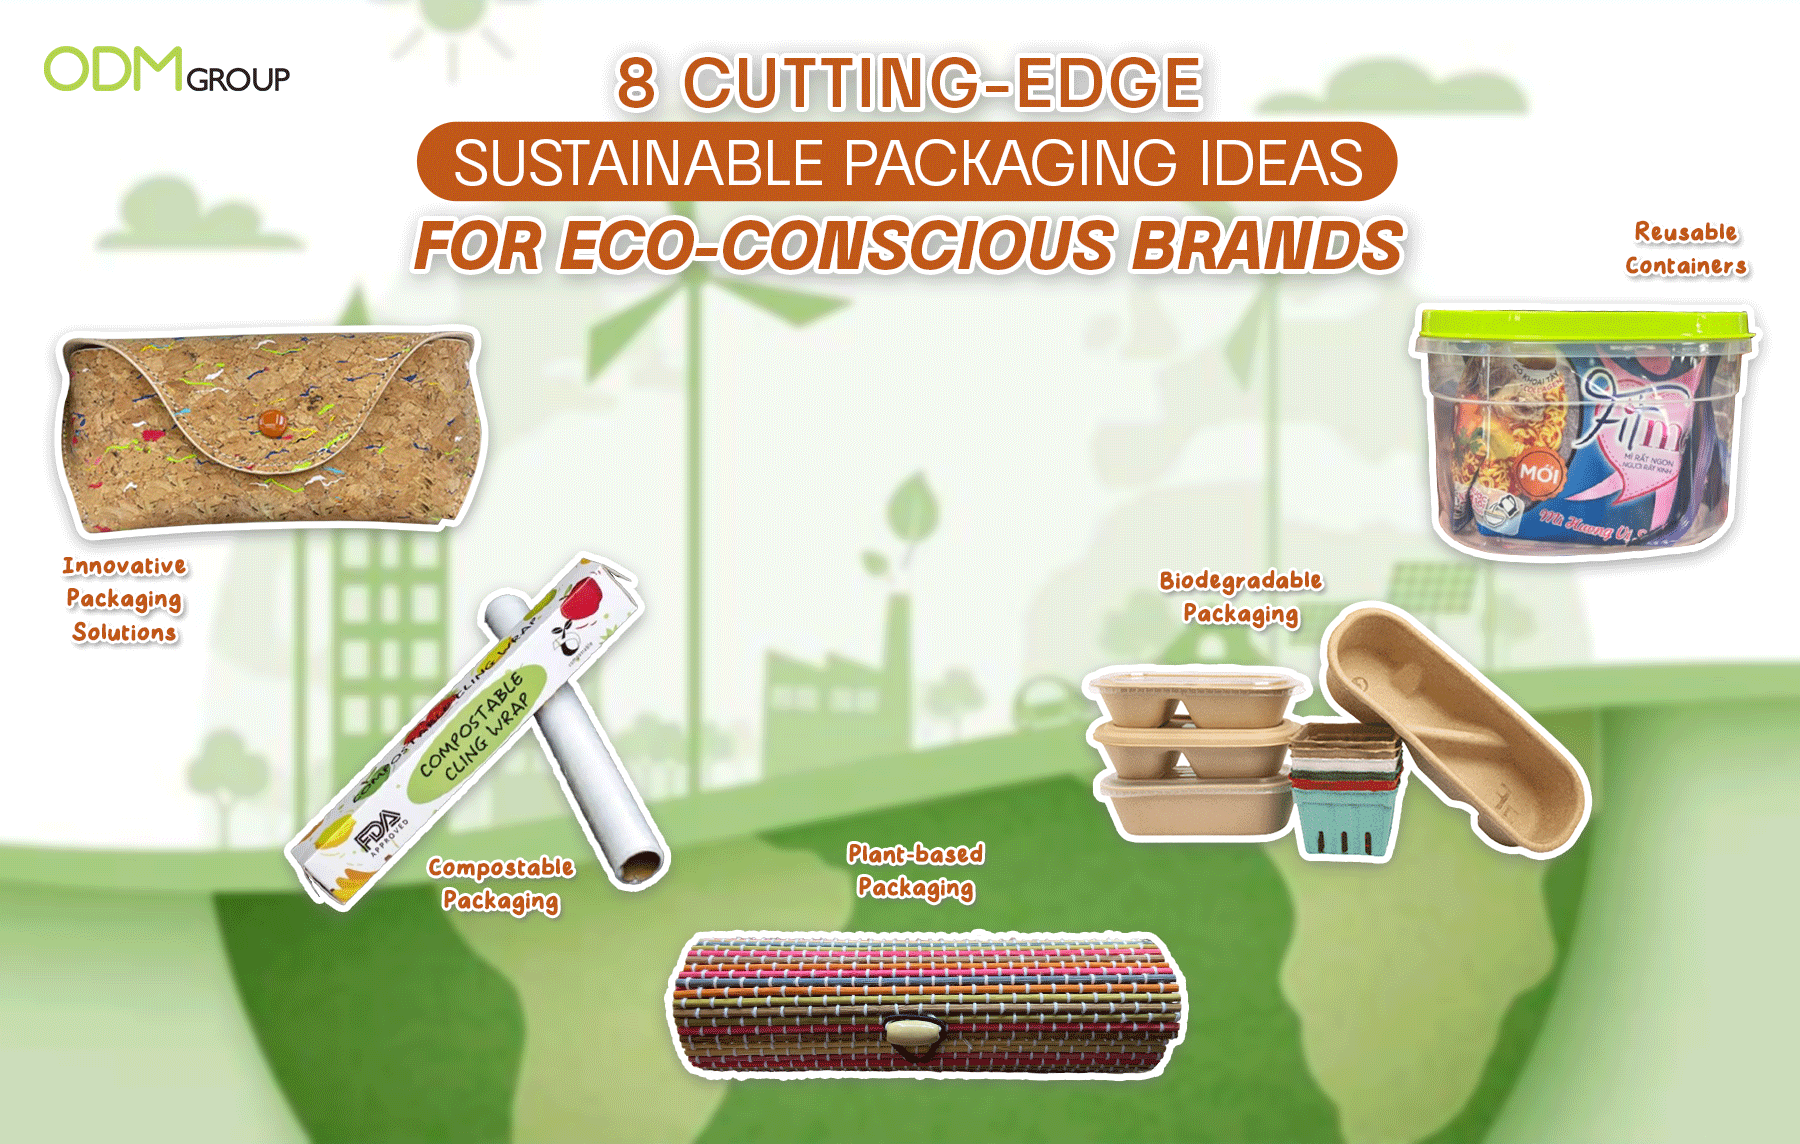 8 Cutting-Edge Sustainable Packaging Ideas for Eco-Conscious Brands